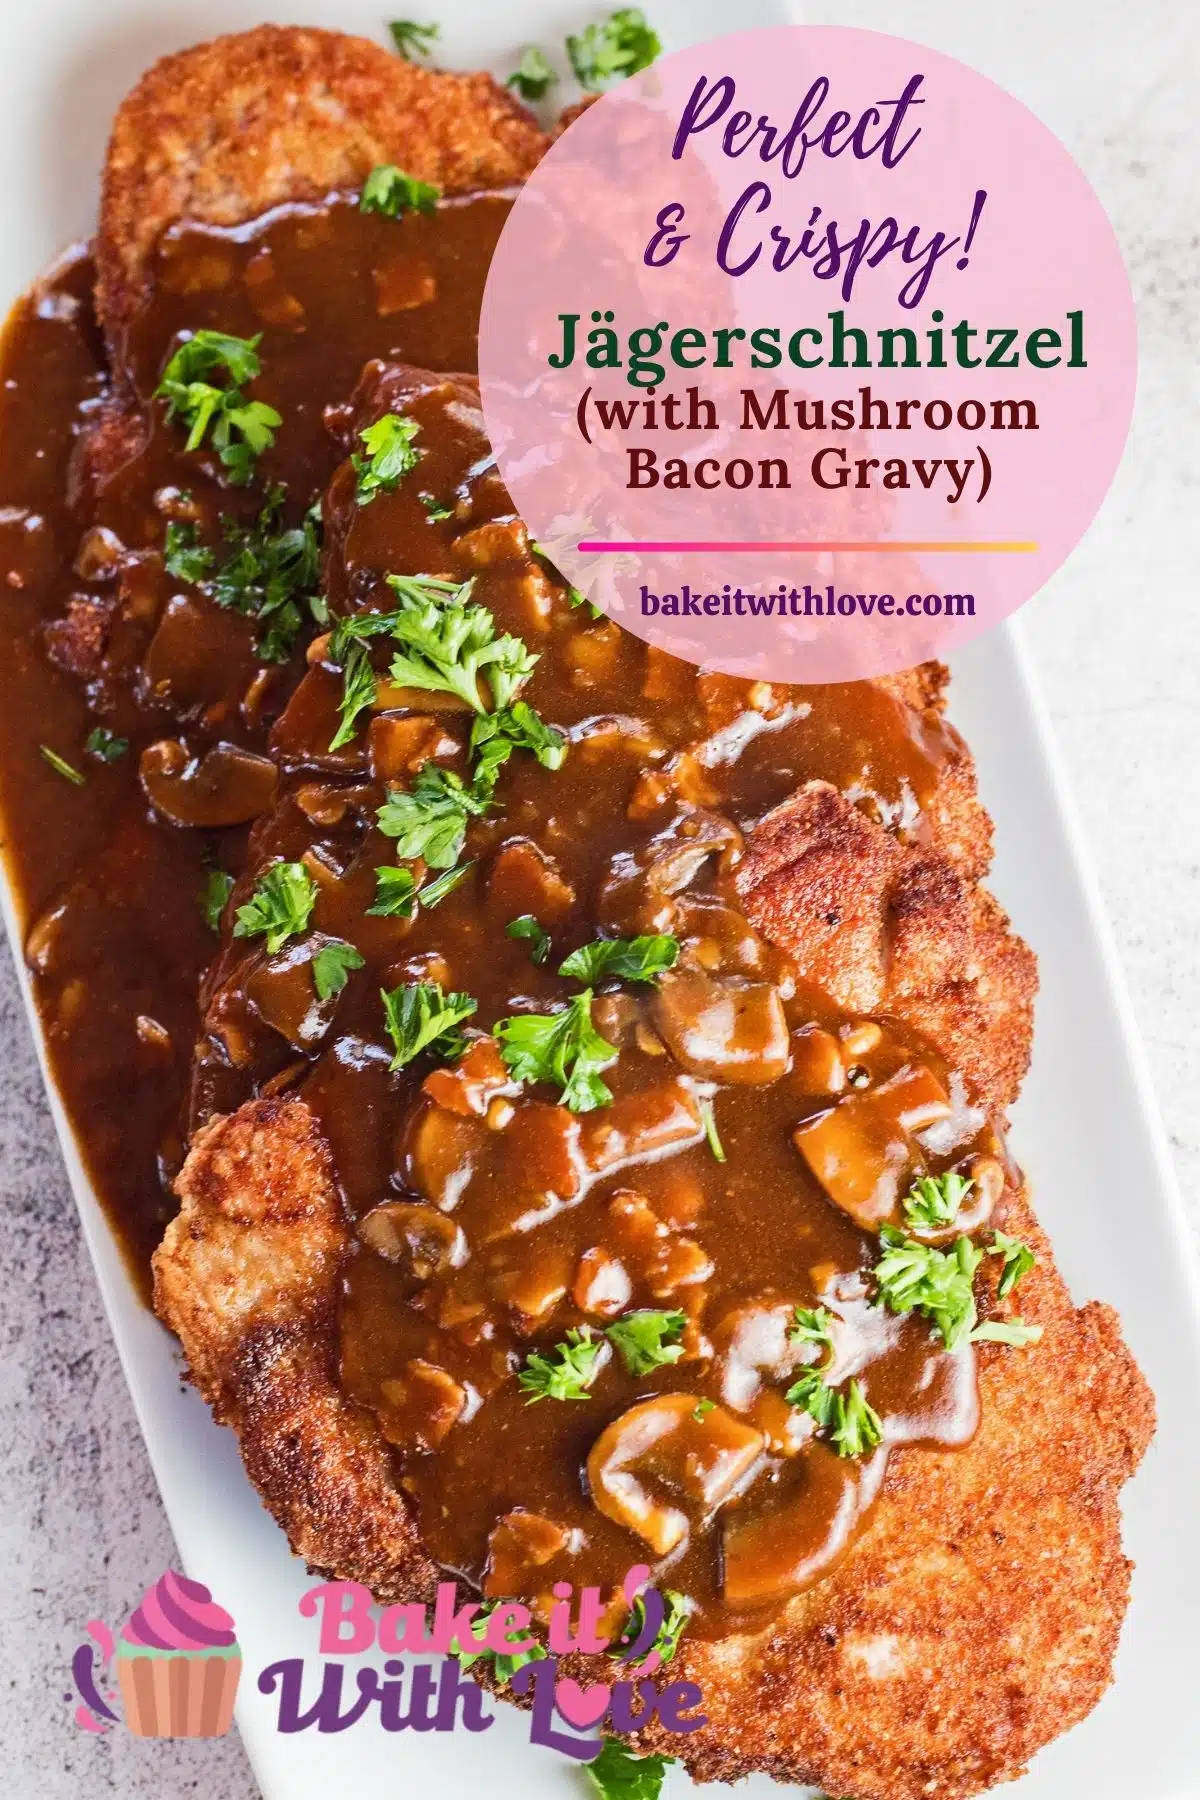 Pin with tall overhead image of German Jagerschnitzel served on a white plate.